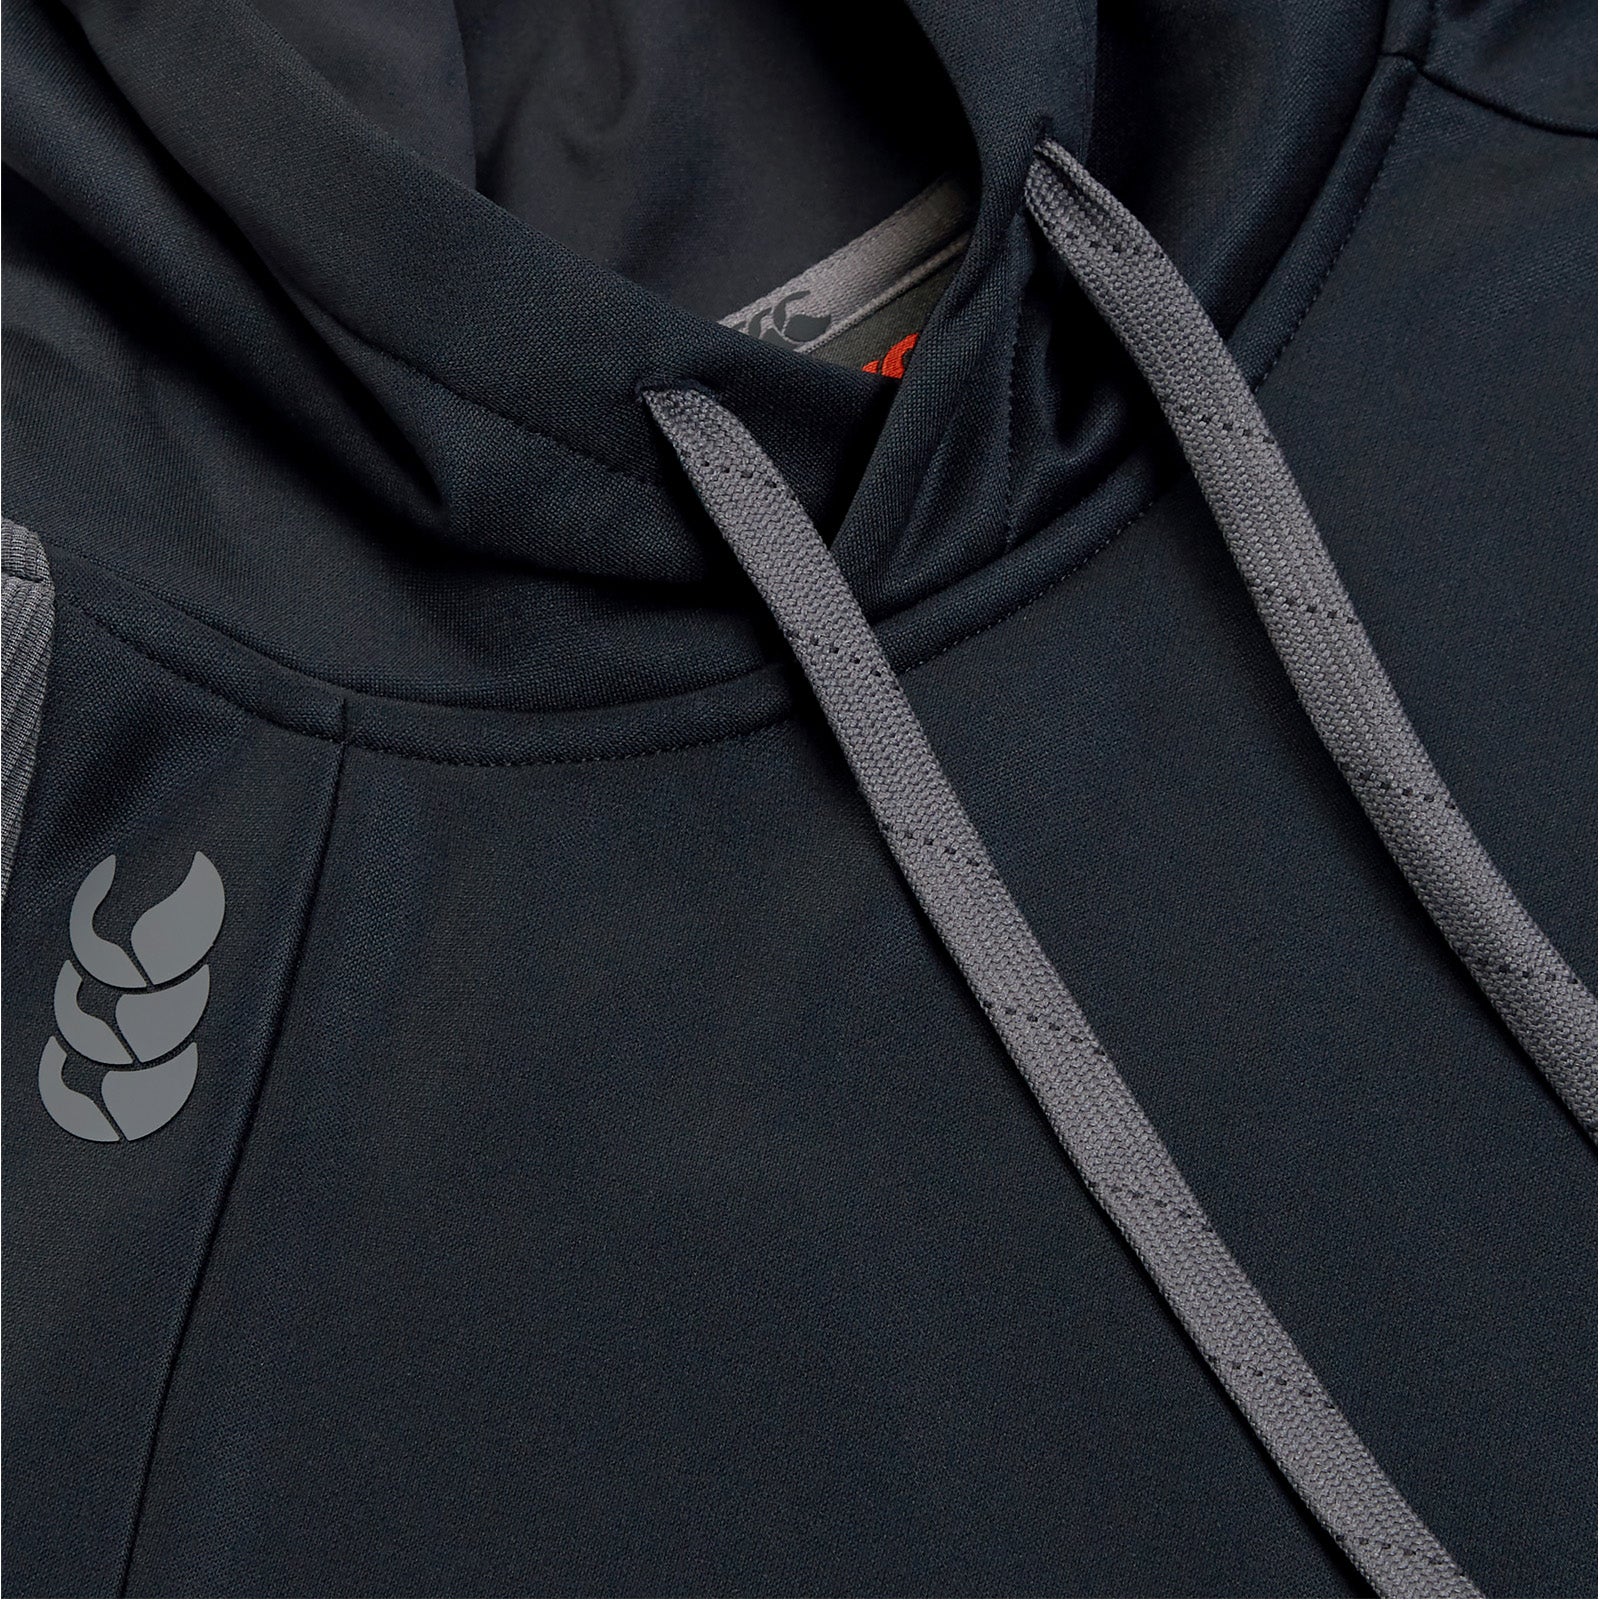 Photo of Canterbury Ladies Elite Training Hoody Black, close up of hood and laces